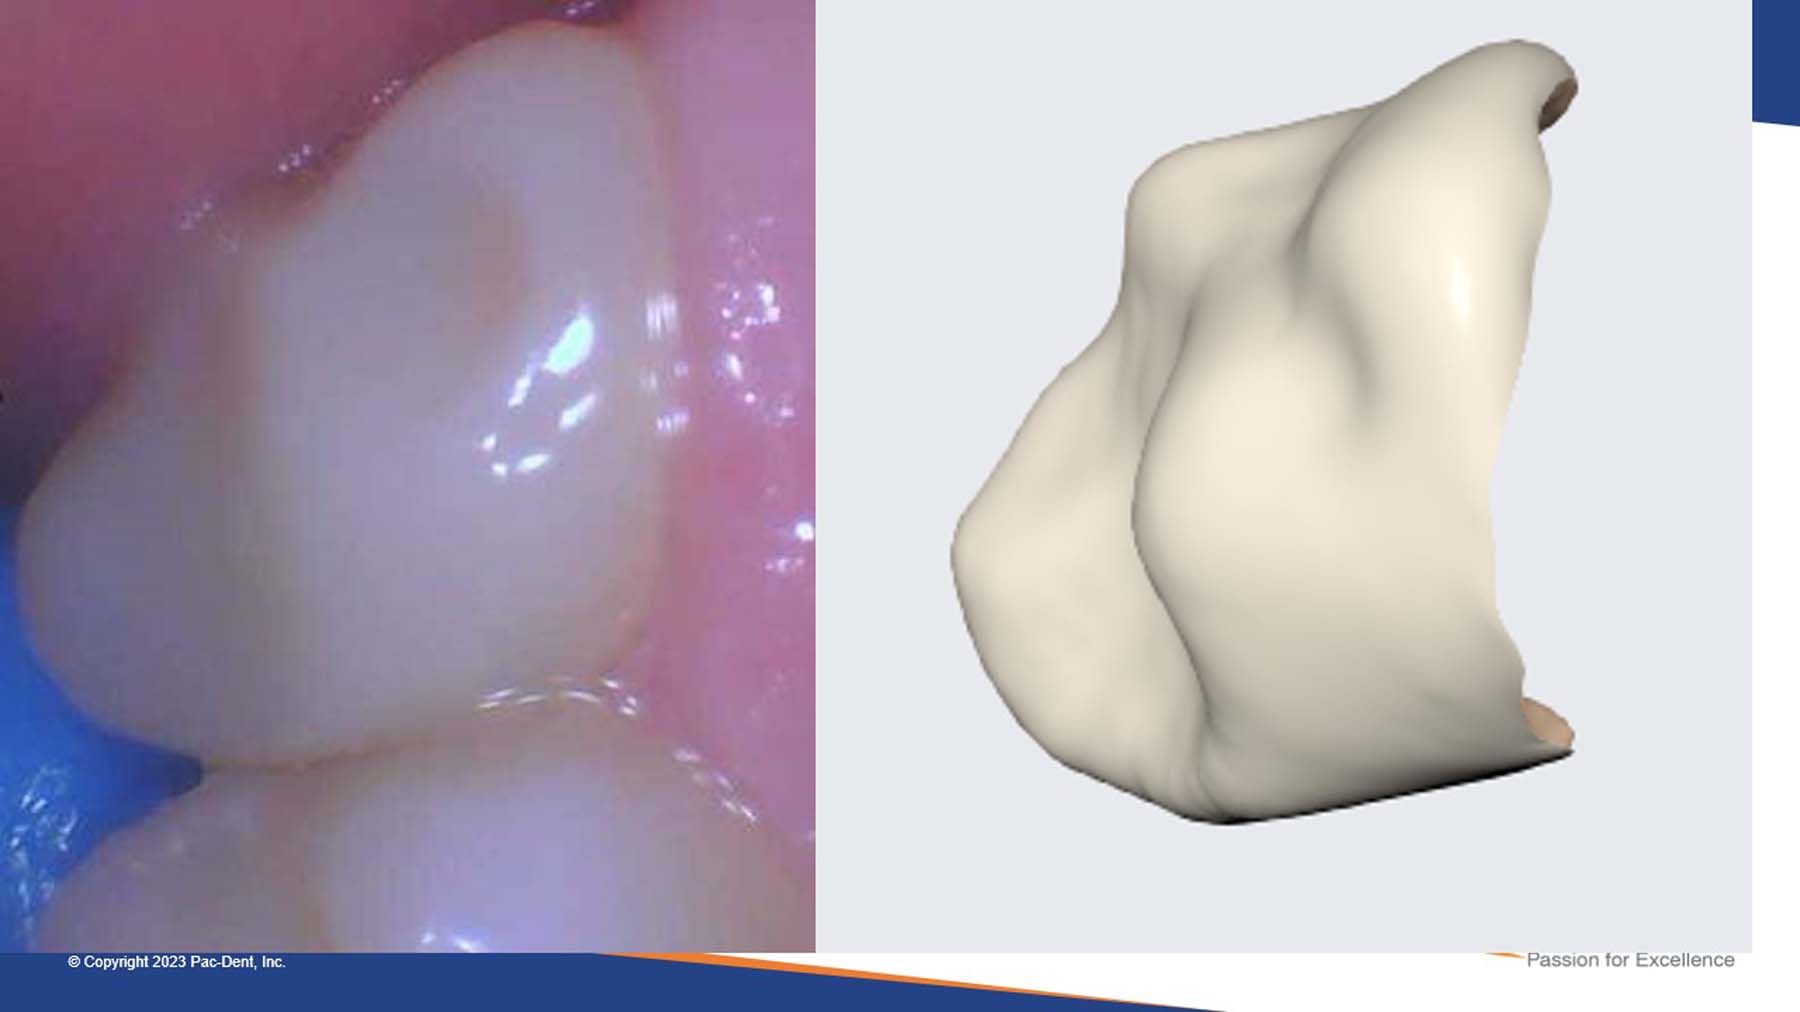 Figures 3a and 3b. Durable and resilient: the restorations showed no color or shade changes months later, and the surrounding tissues remained healthy.